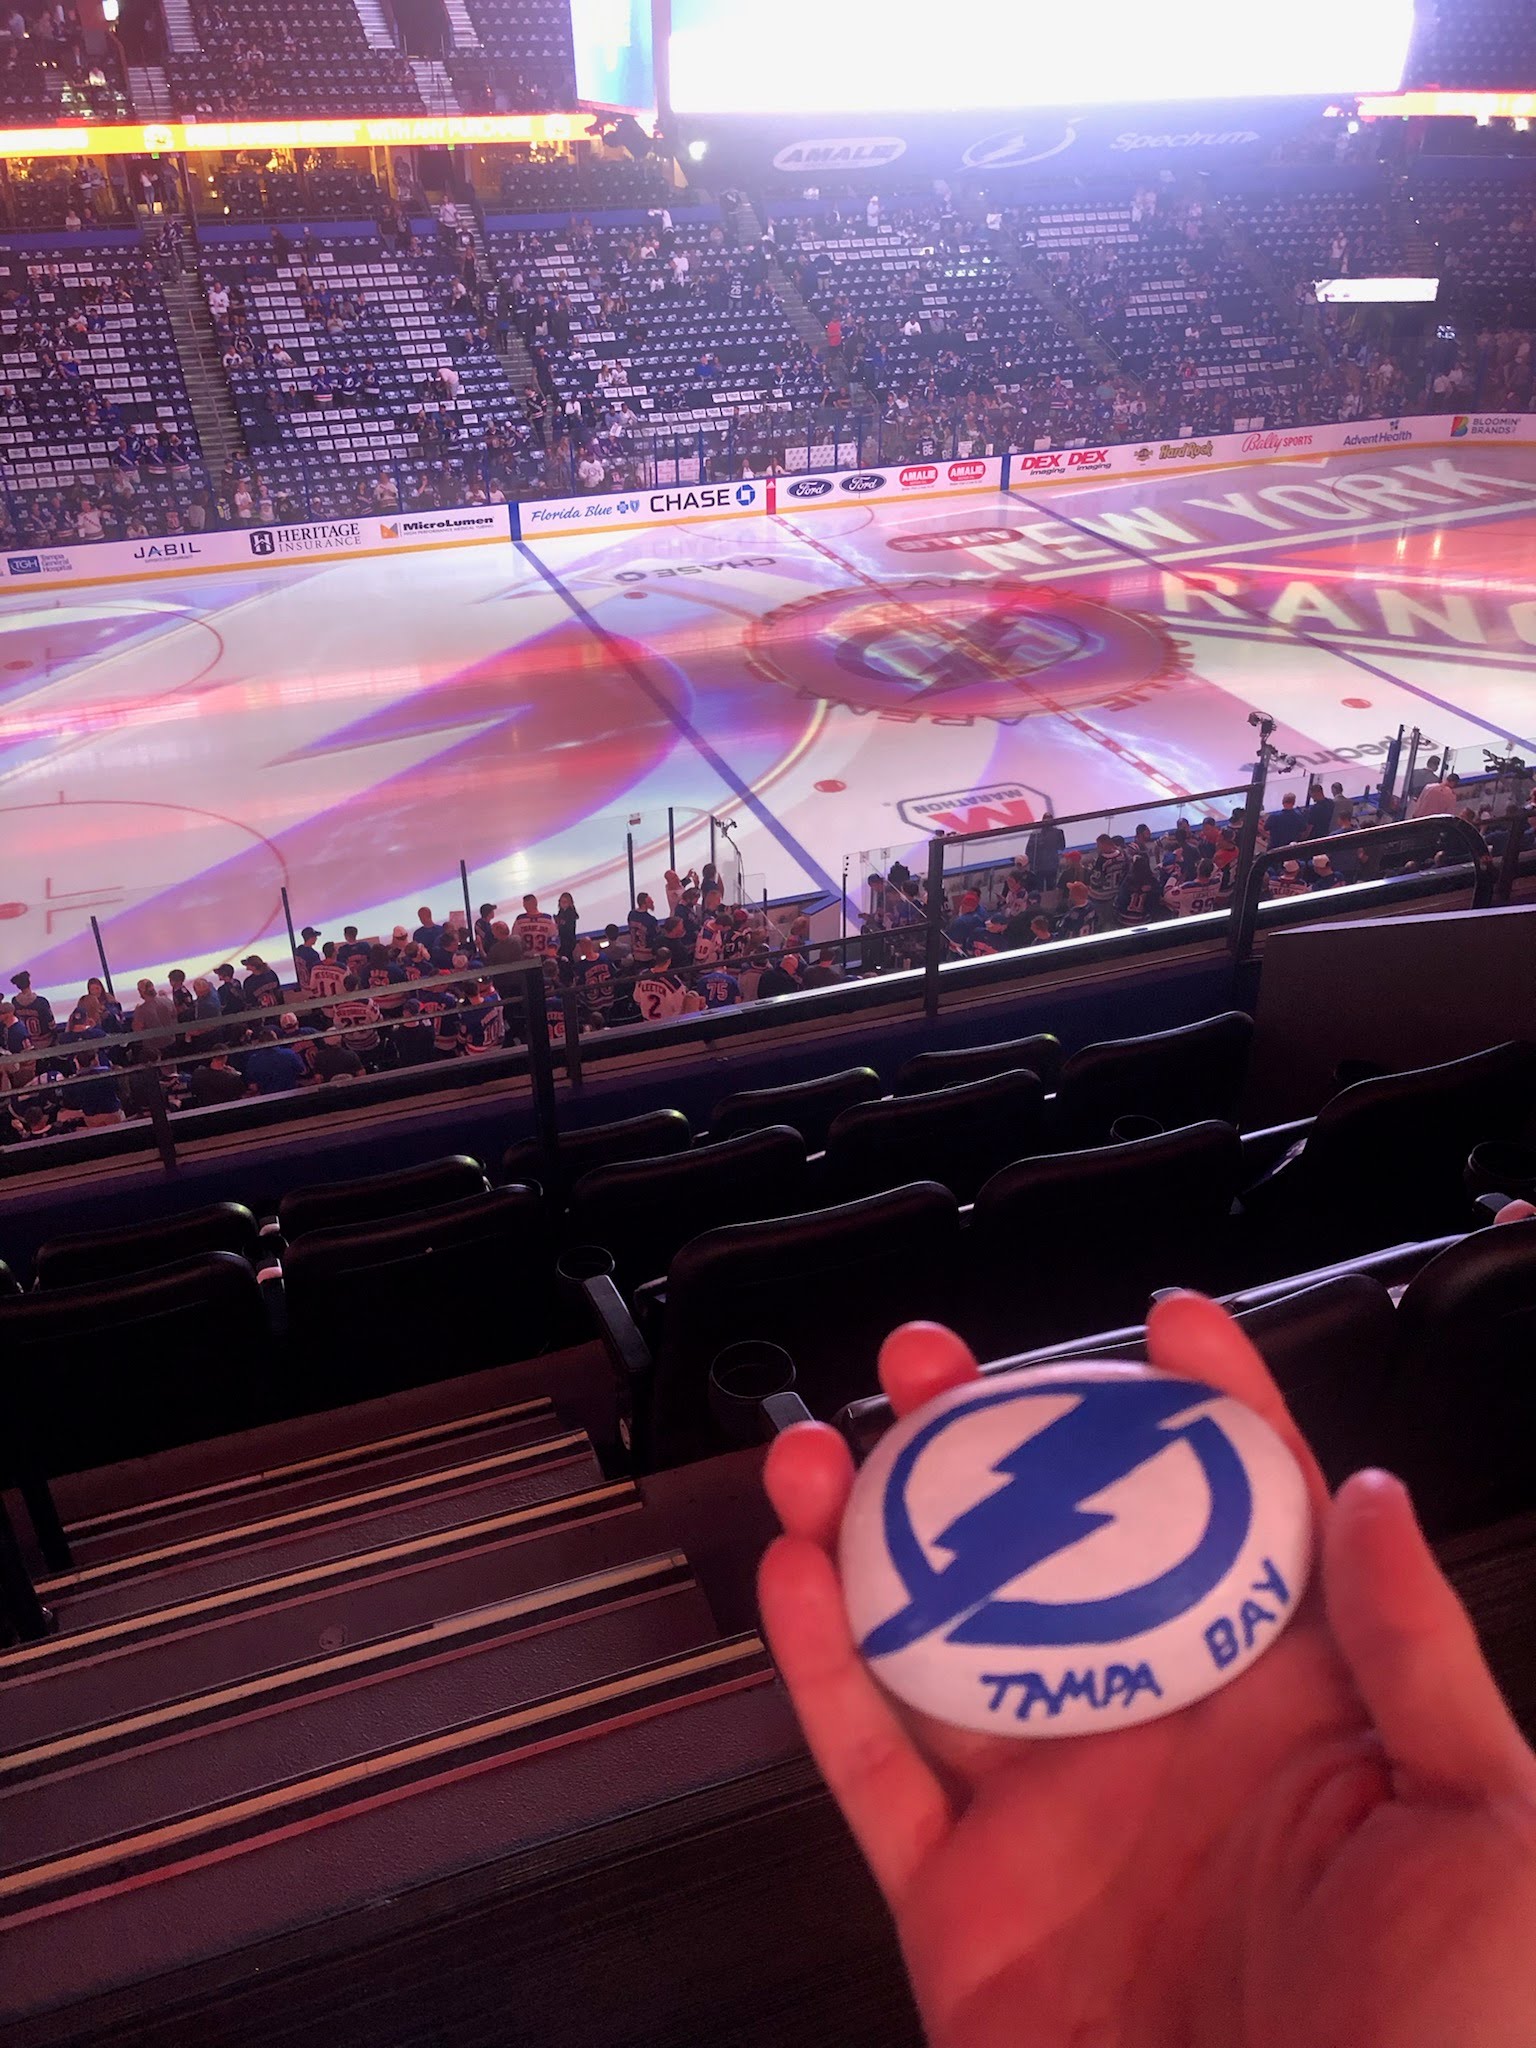 Tampa Bay Lightning fans share superstitions and rituals for a